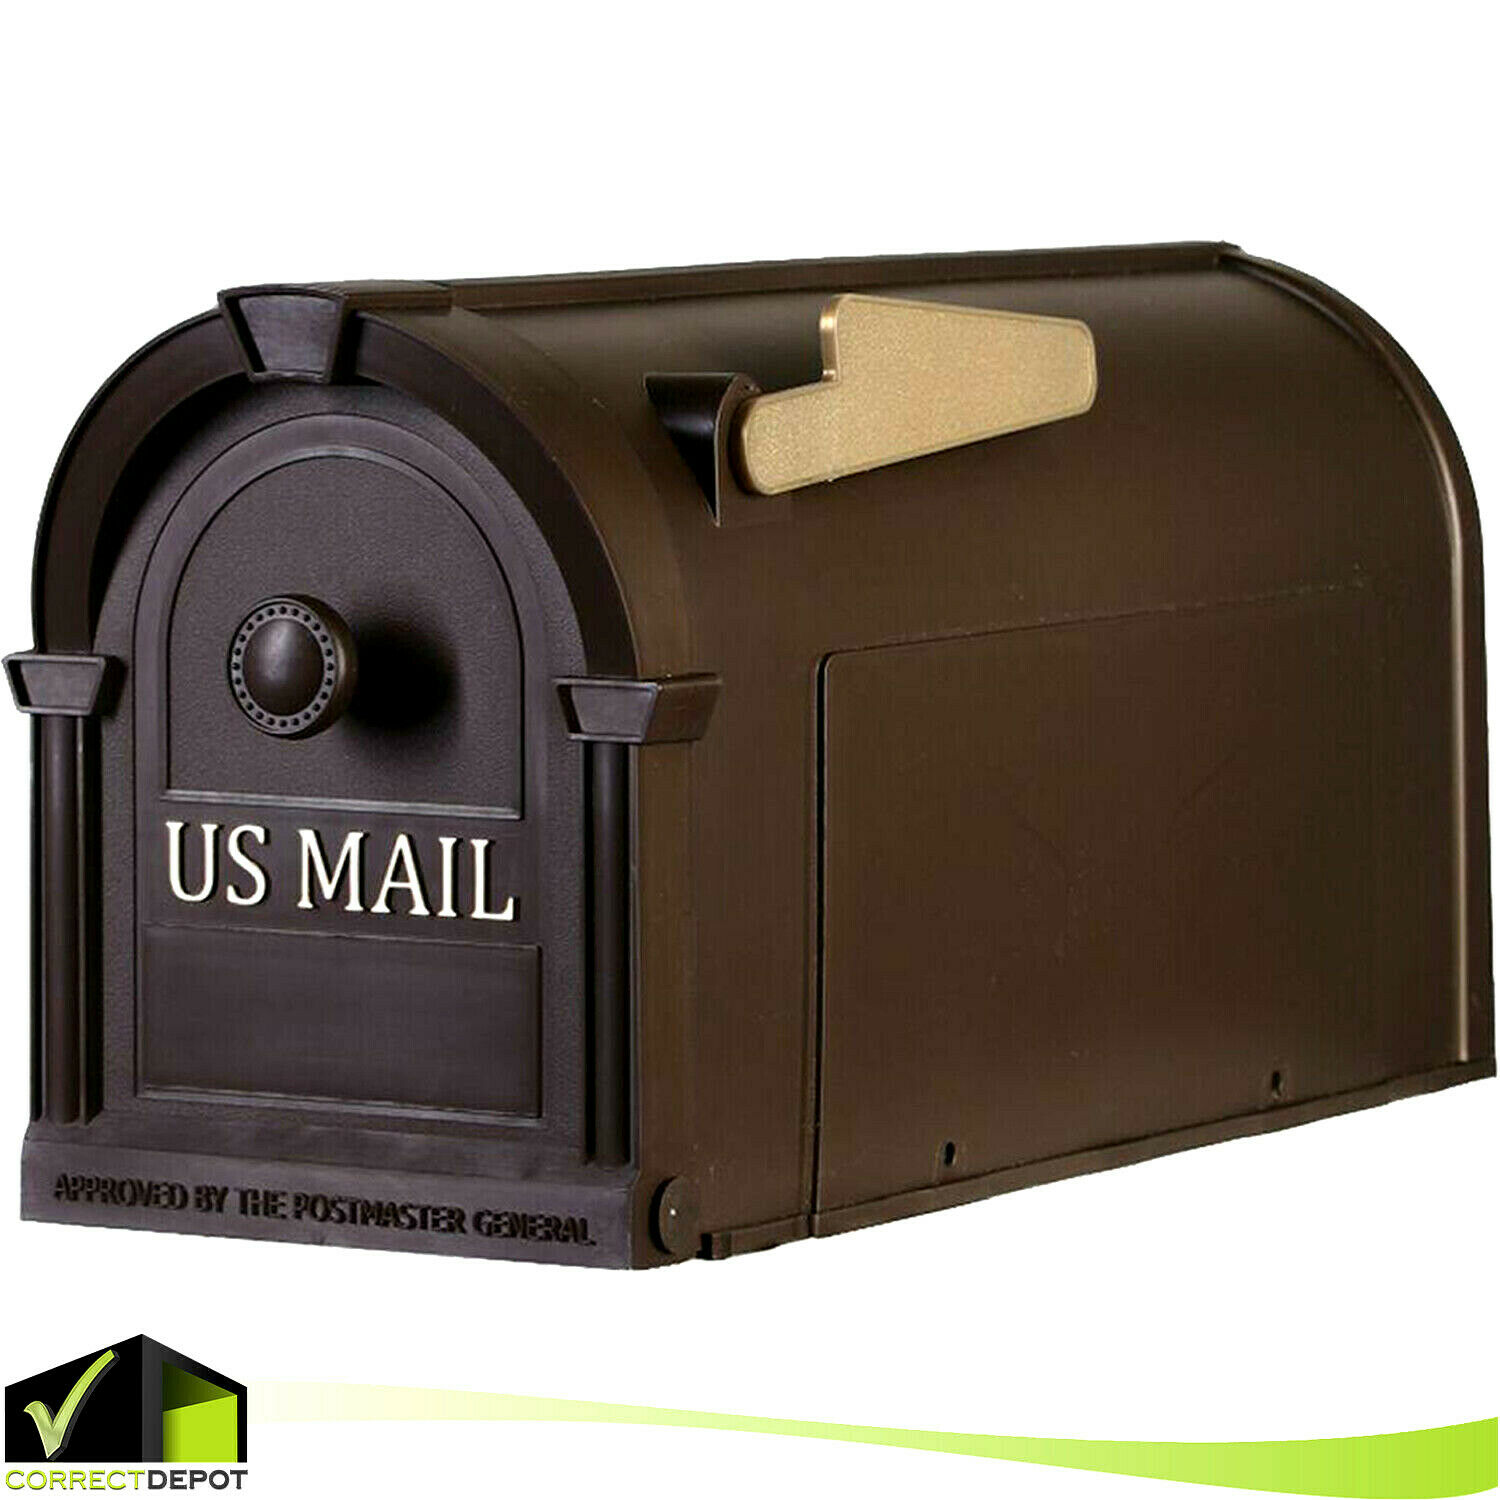 Post Mount Mailbox Durable Plastic Postal Large Mail Box Storage Gold Lettering